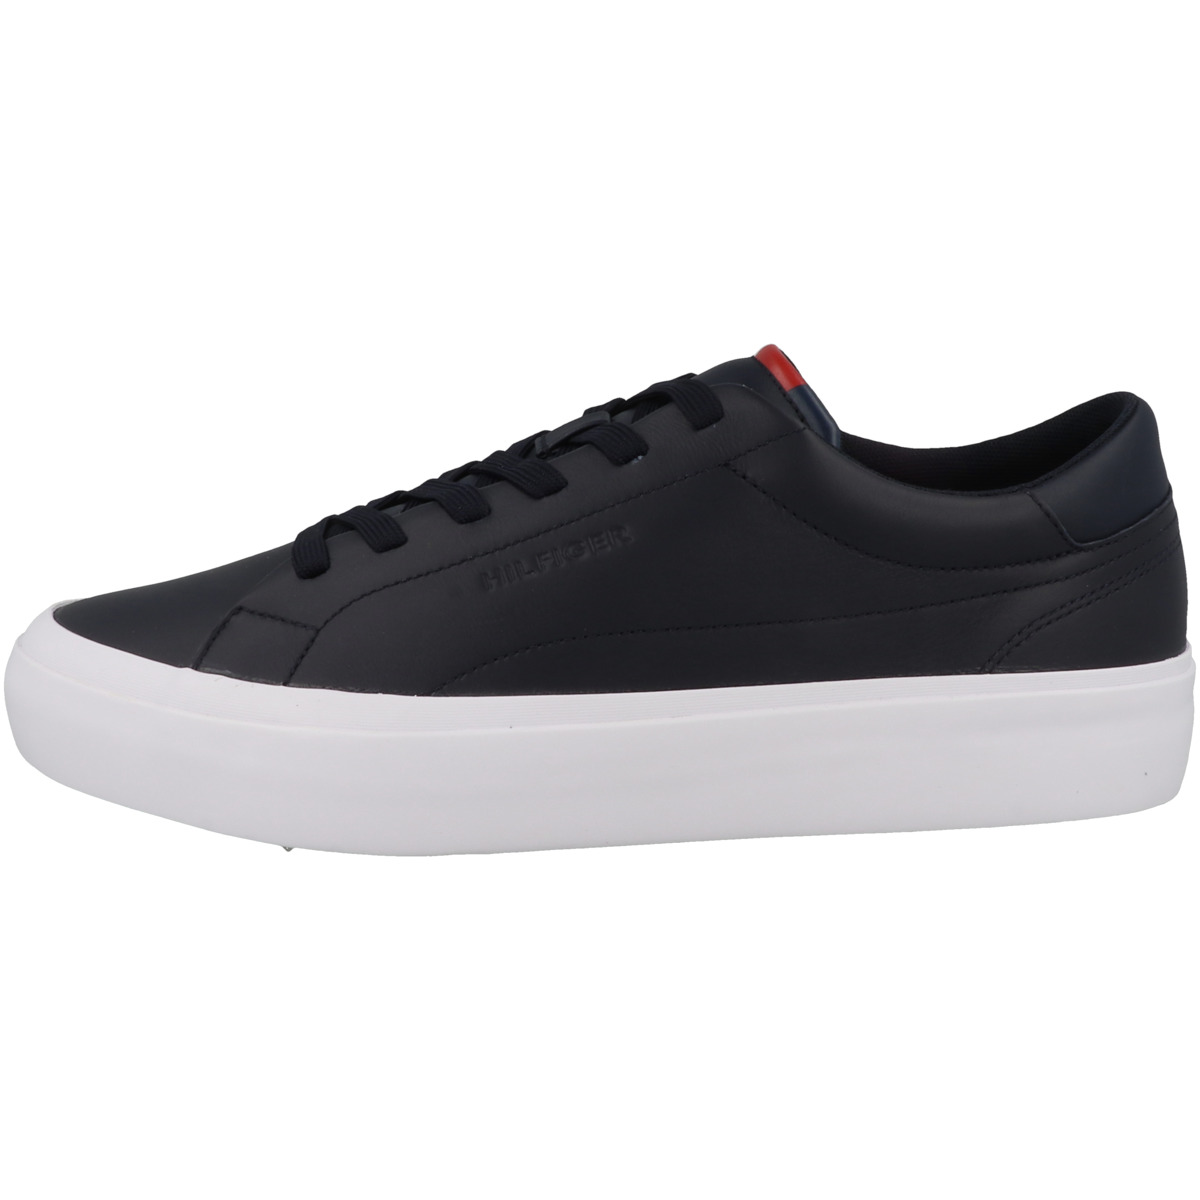 Tommy Hilfiger Prep Vulc Leather Sneaker low